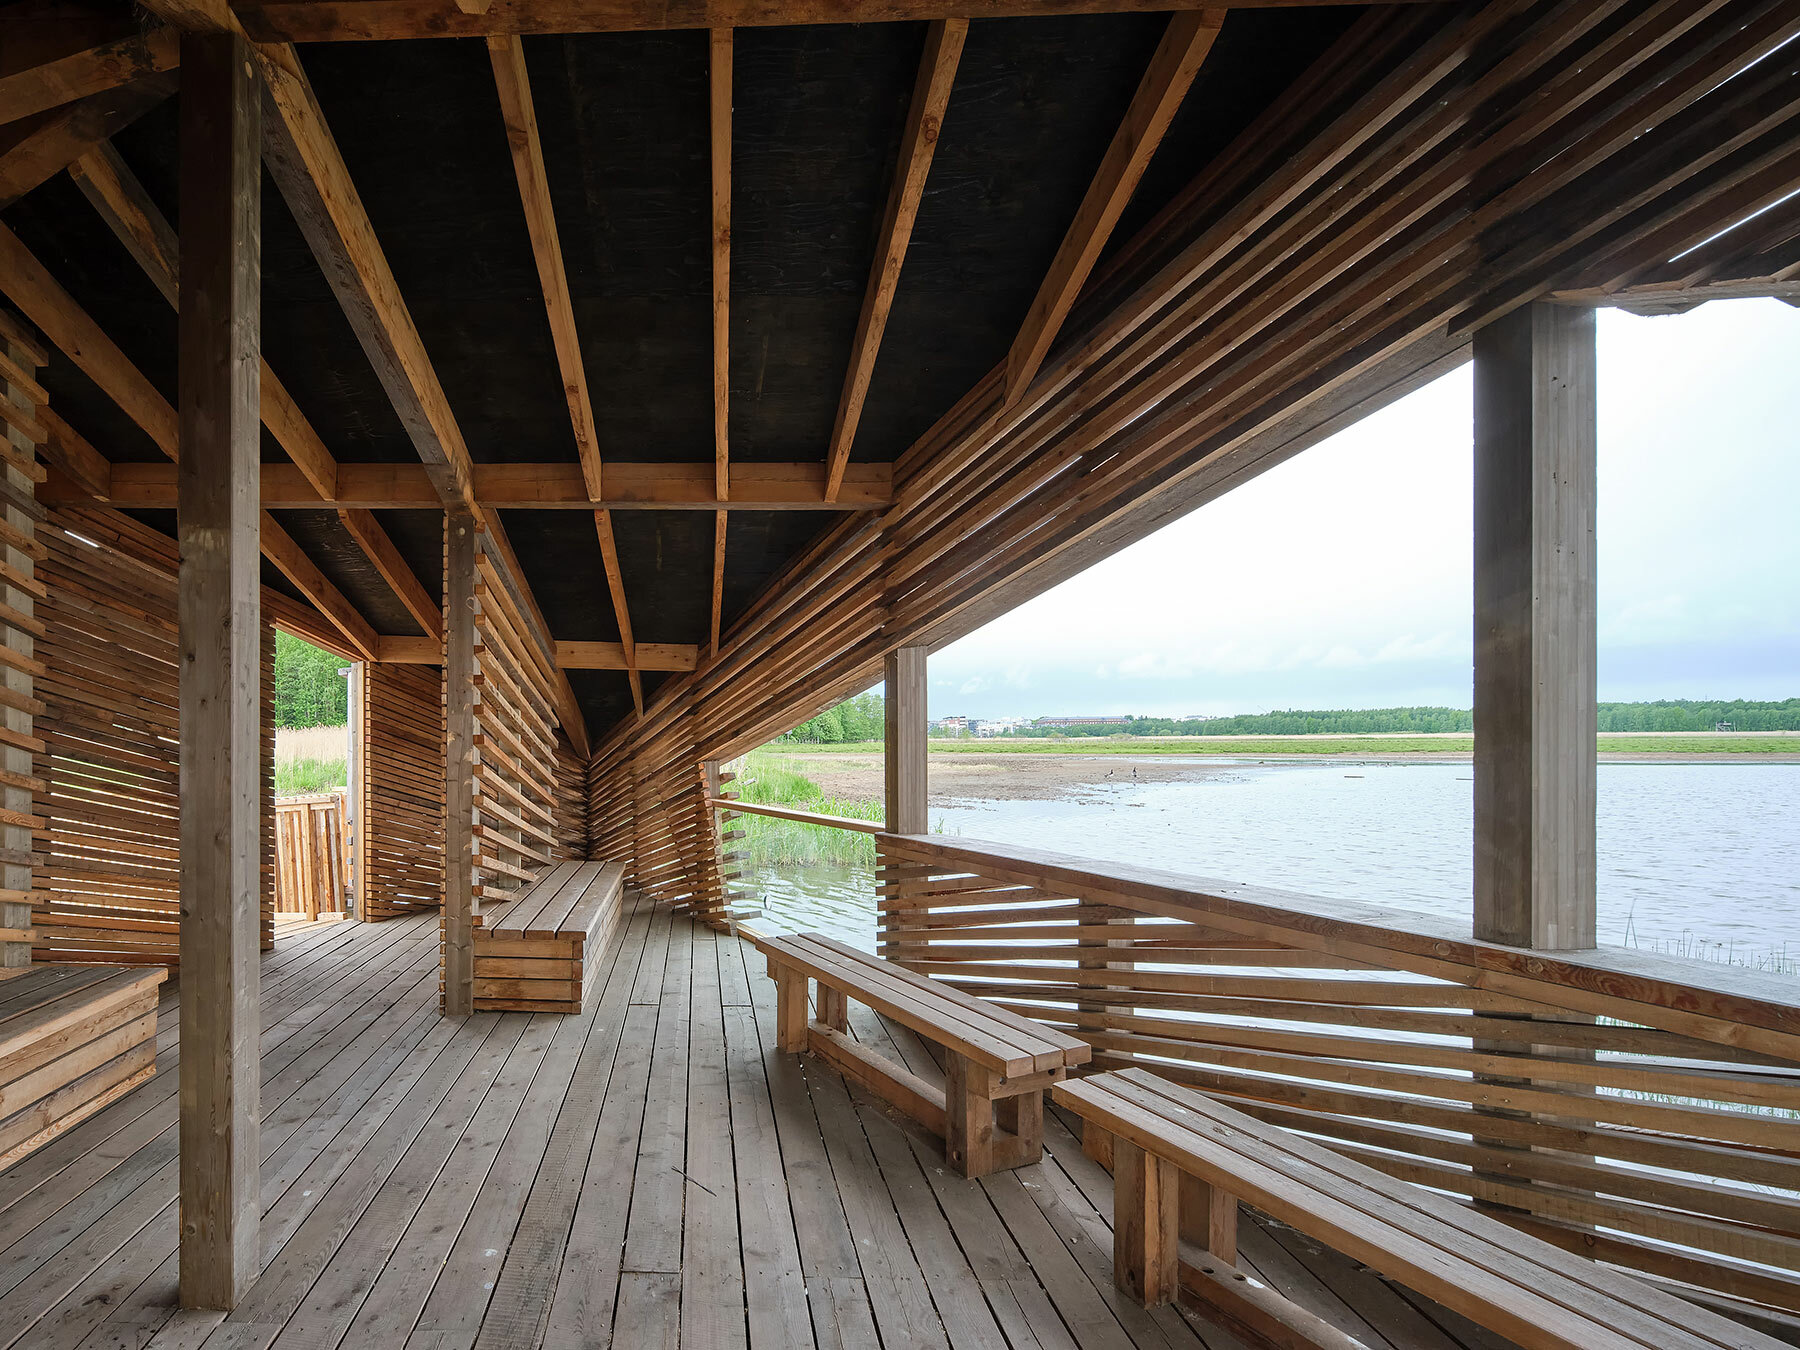 studio puisto floating designs birdwatchers hut for finland timber in